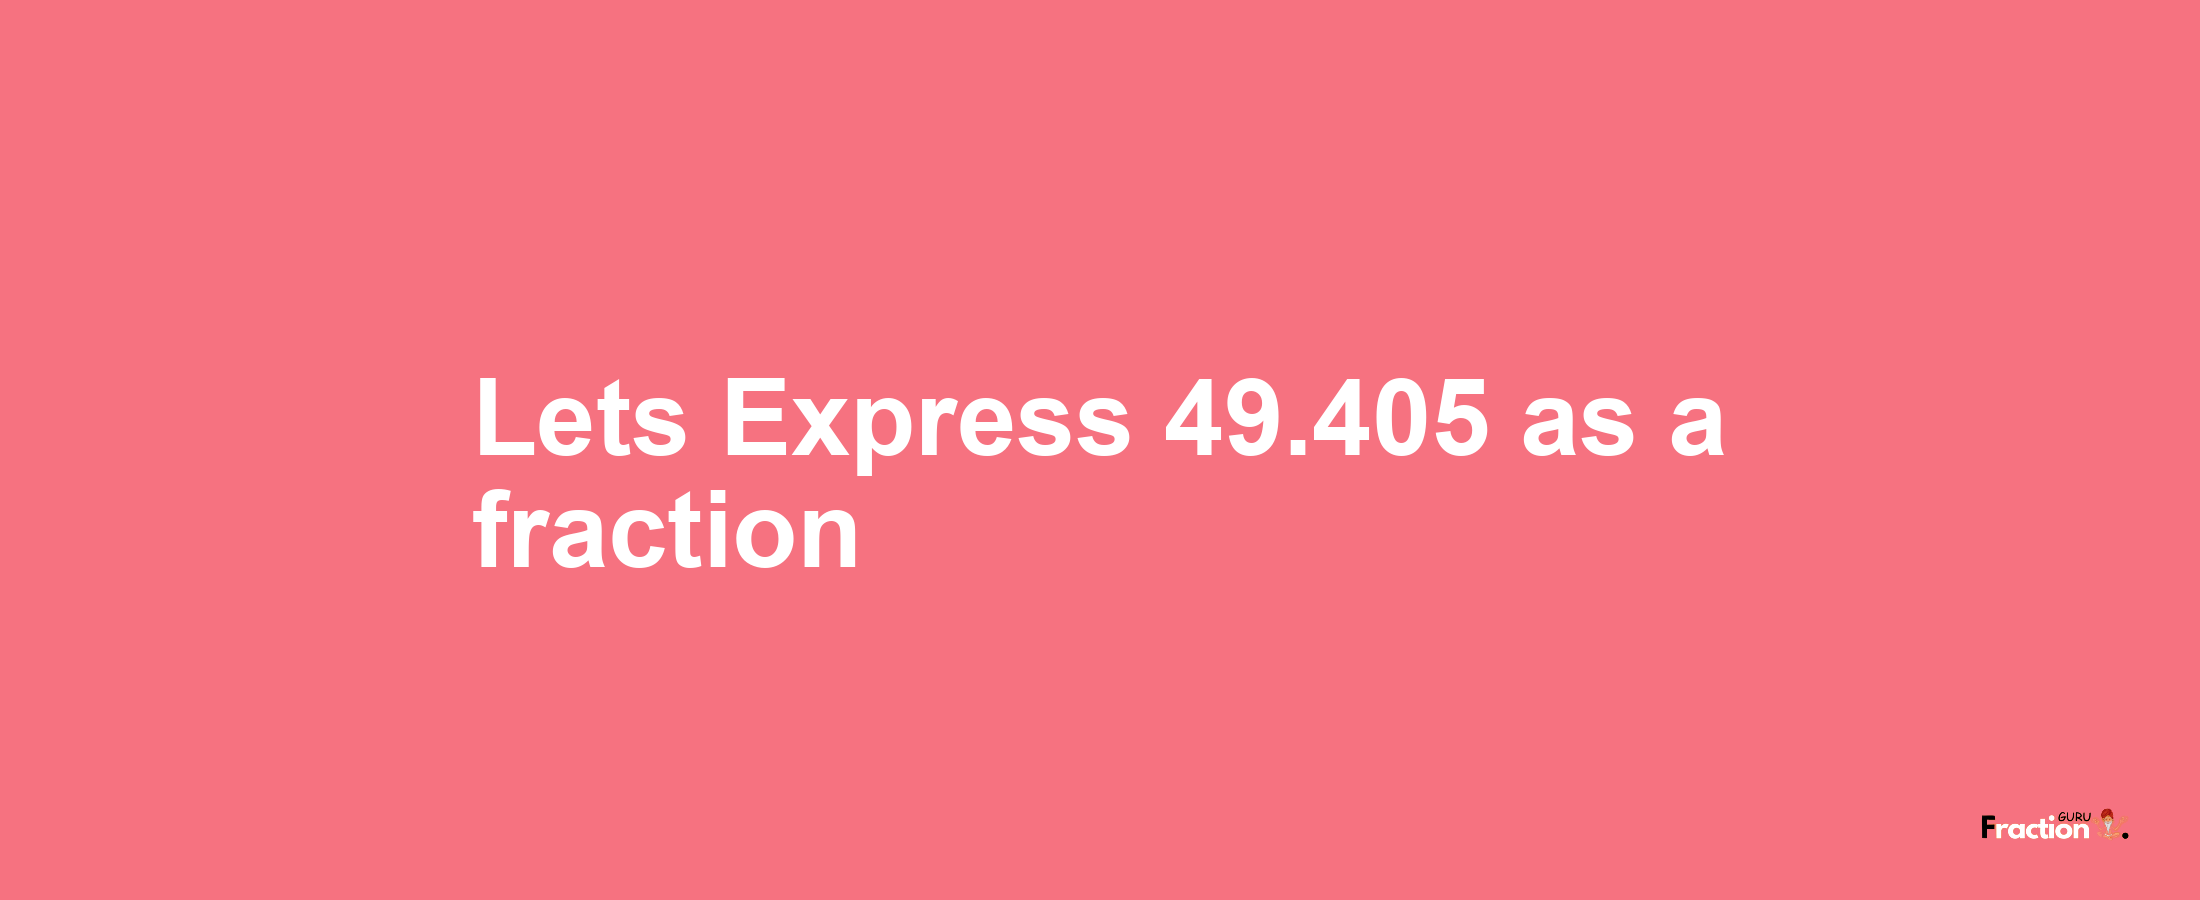 Lets Express 49.405 as afraction